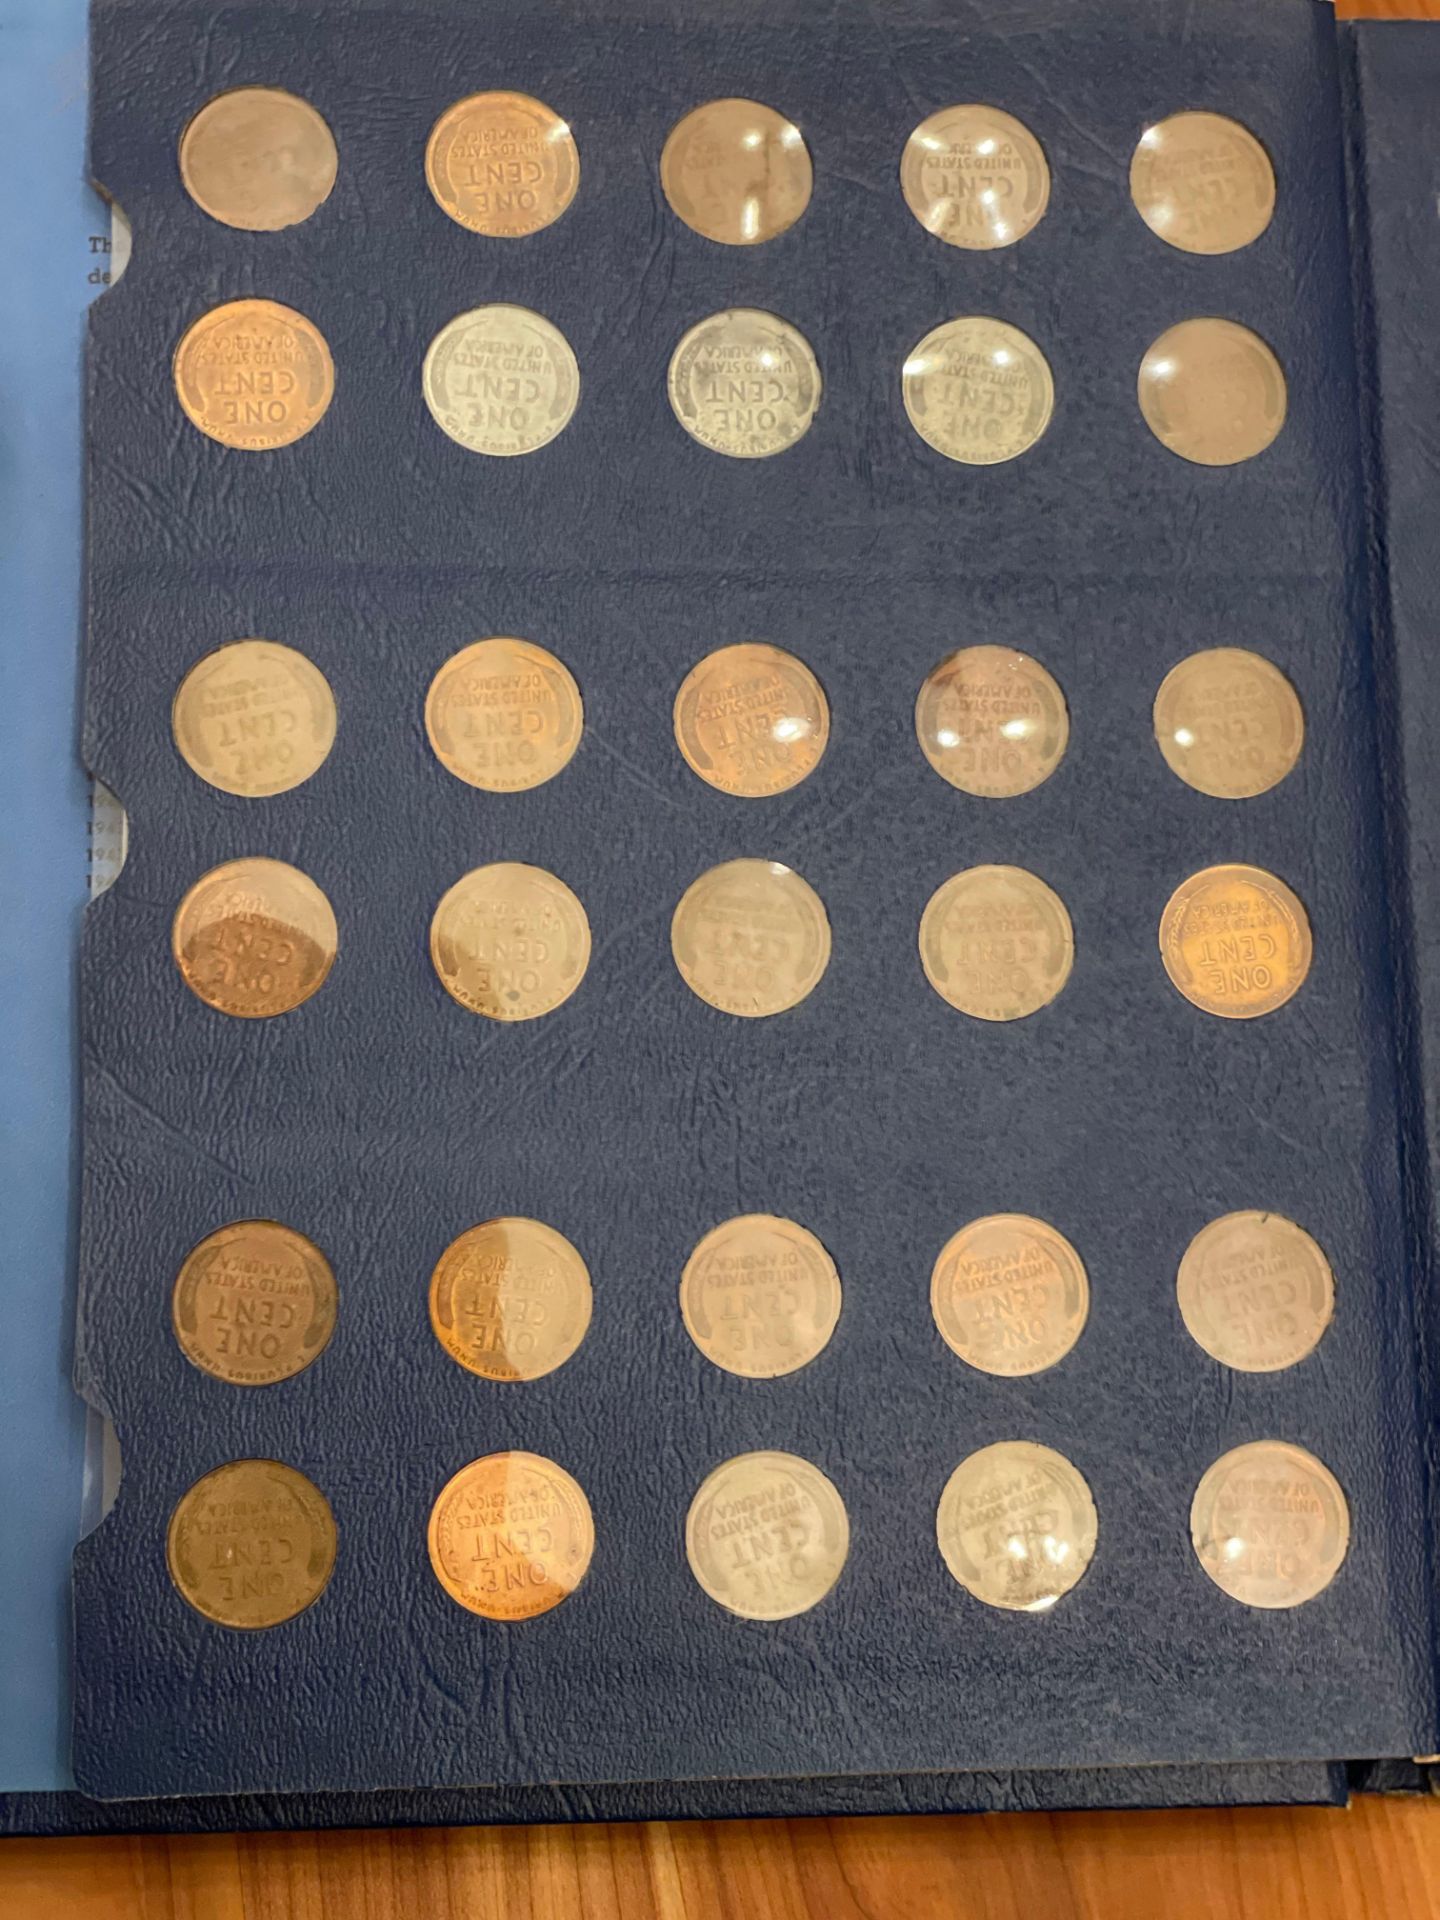 Indian Head Pennies, wheat pennies - Image 12 of 20